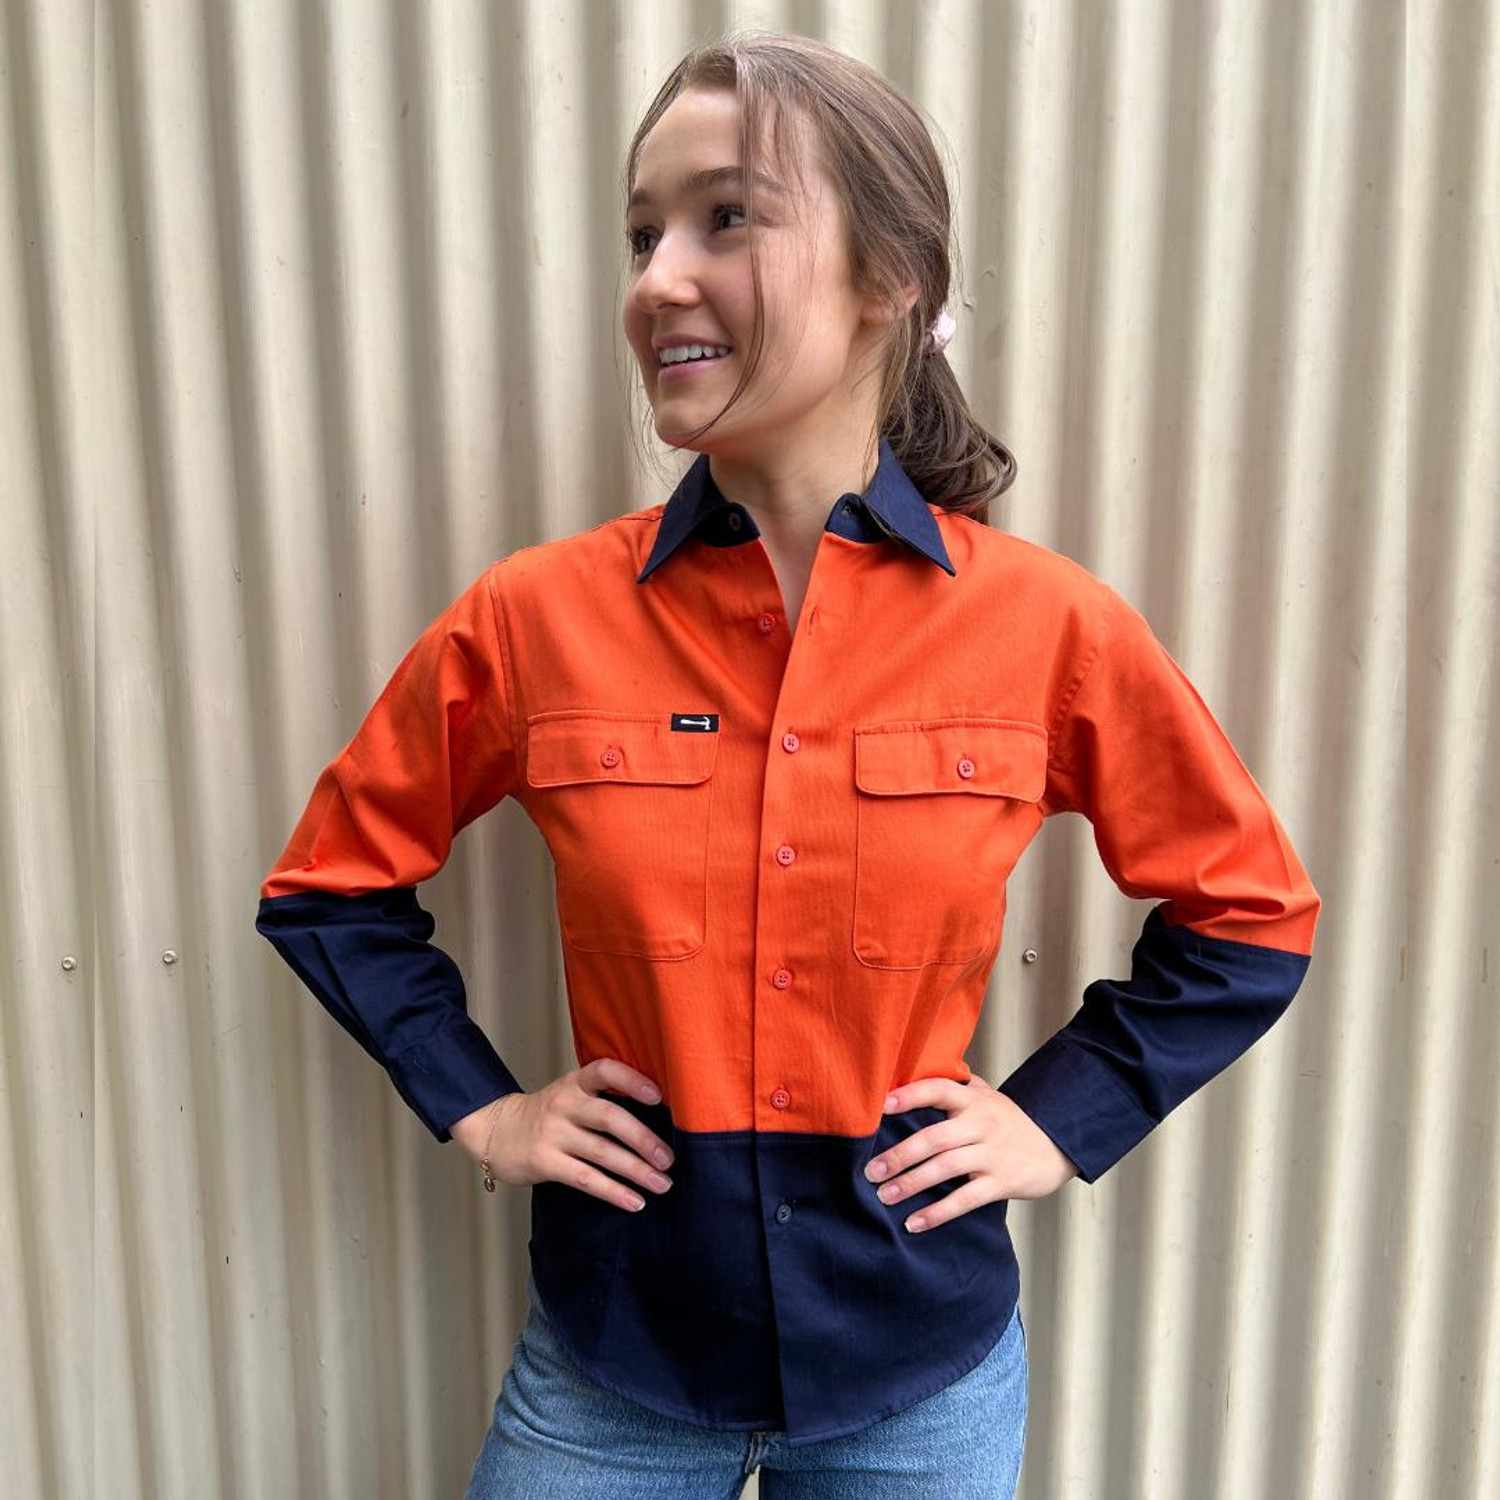  Hammer and Needle Ladies Cotton Drill Long Sleeve/Open Front Hi-Vis Work shirt in Orange/Navy (Bulk Deal Buy 4+ for $44.95 each) 